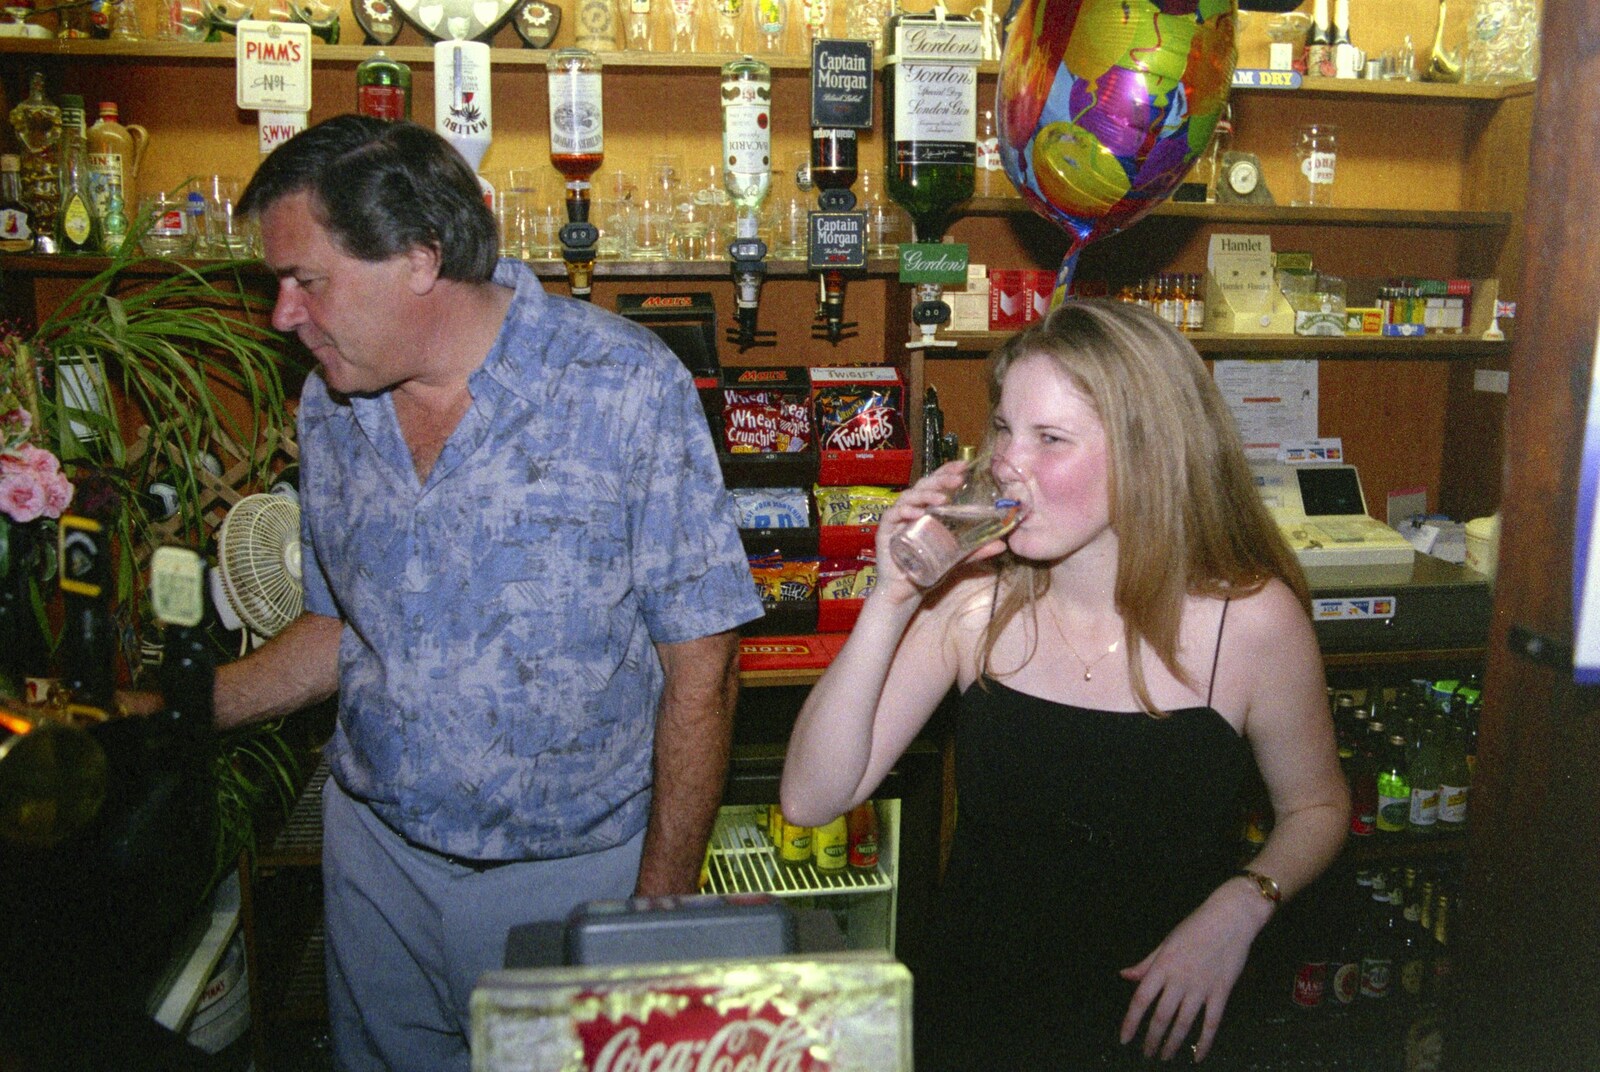 Alan and Lorraine behind the bar from Lorraine's 21st Birthday, The Swan, Suffolk - 10th June 2000